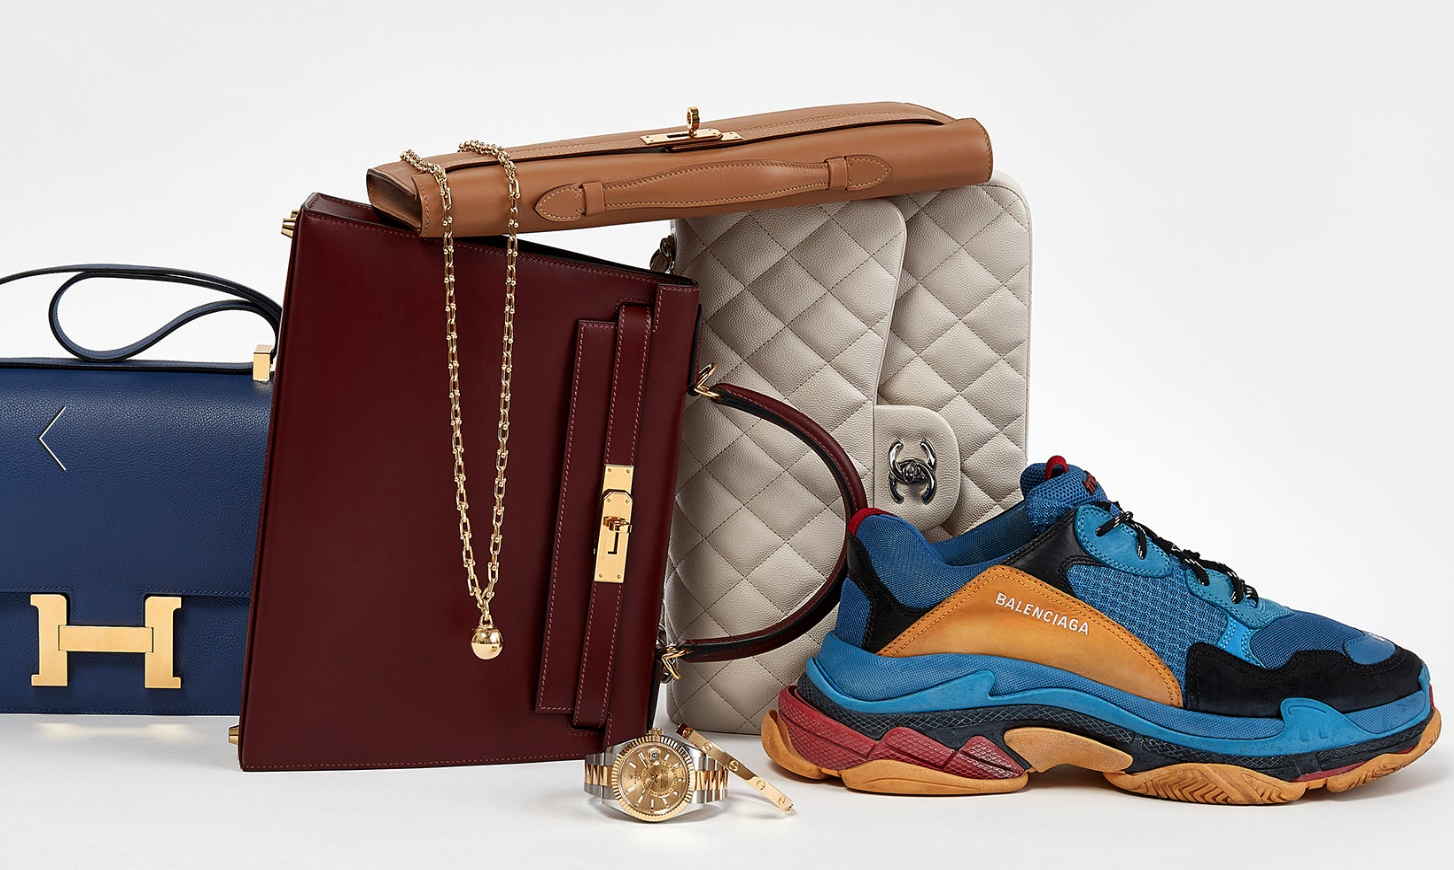 The resell market for luxury goods is growing stronger